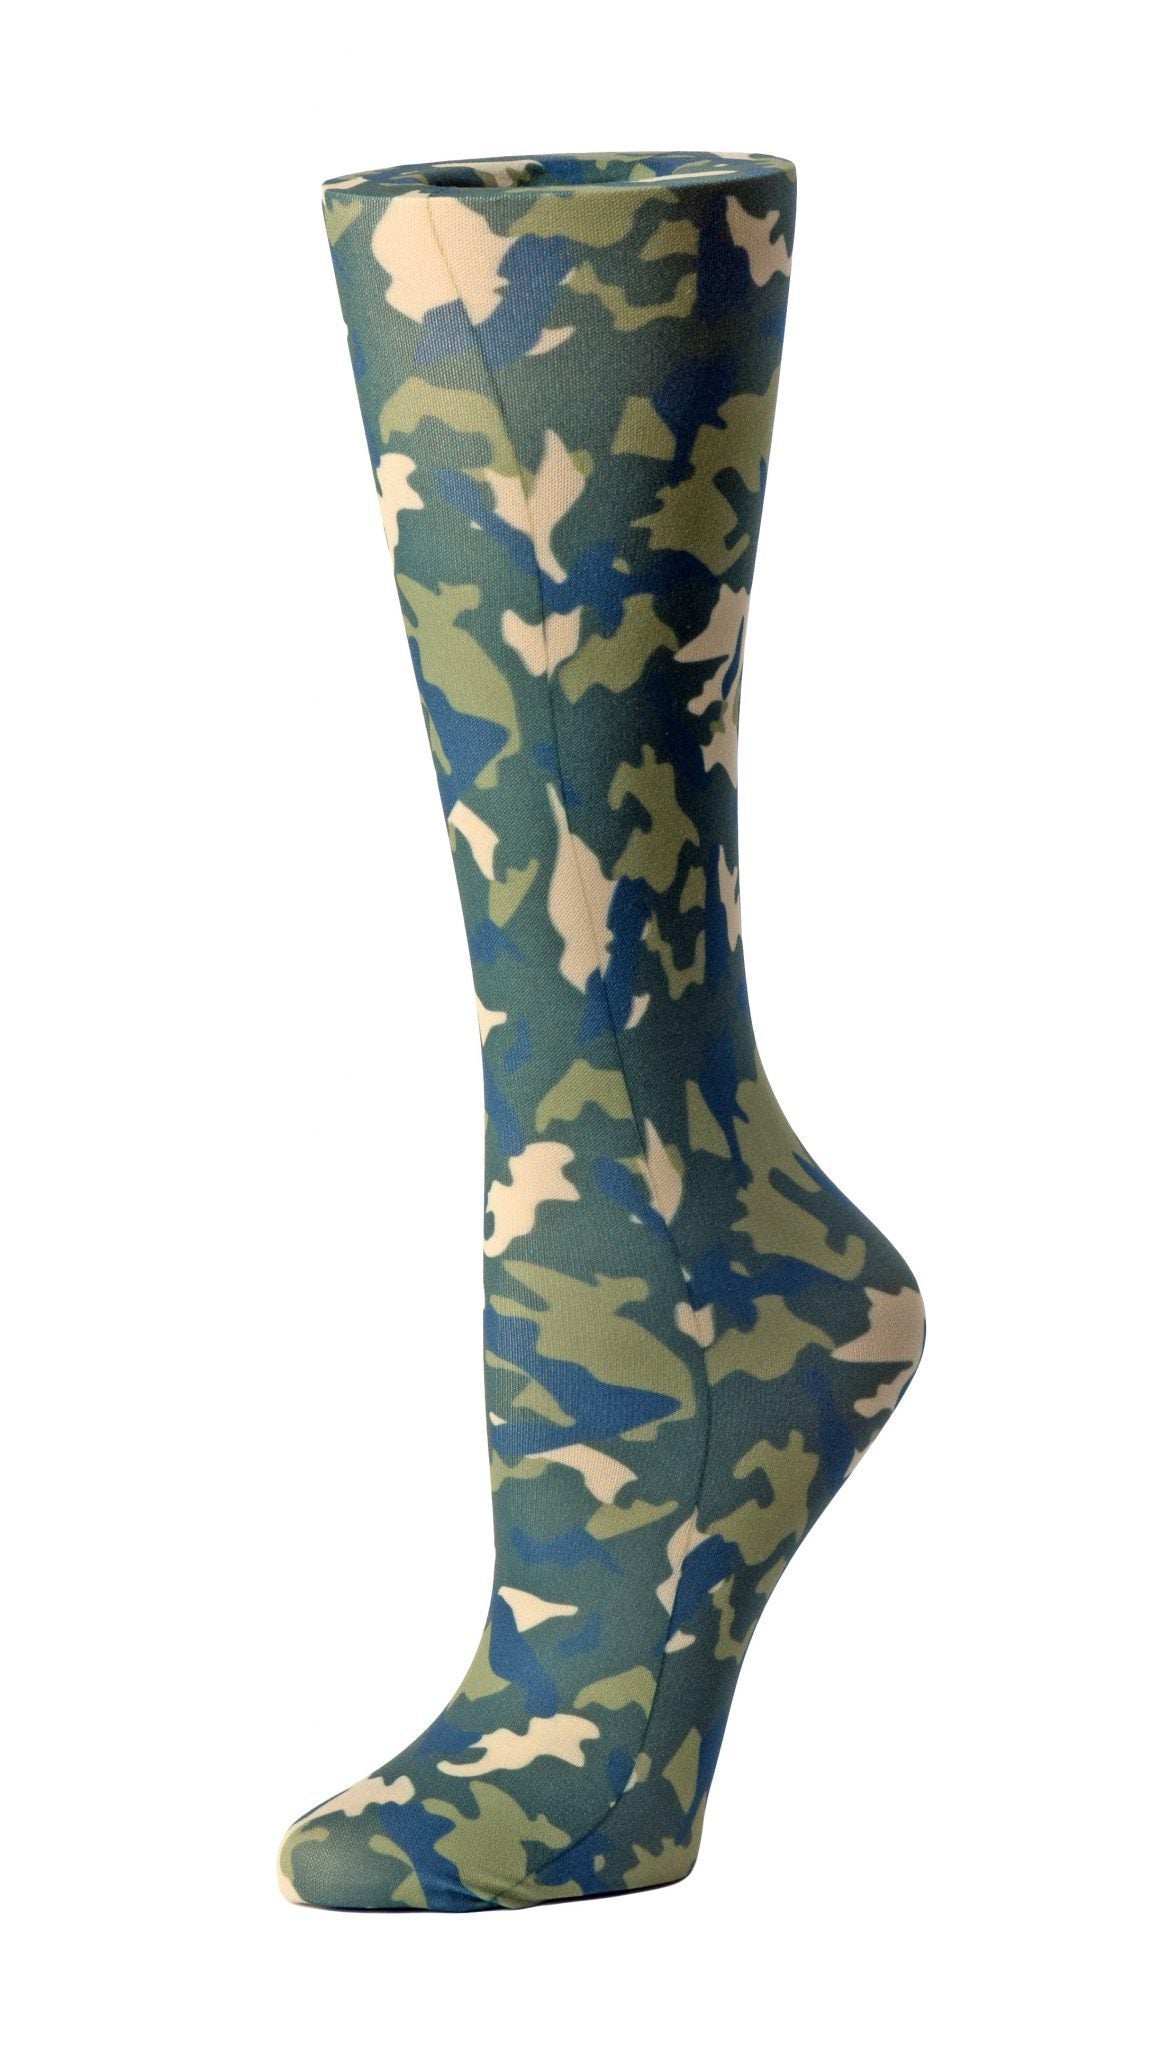 Cutieful Moderate Compression Socks 10-18 MMhg Wide Calf Knit Print Pattern Green Camo at Parker's Clothing and Shoes.